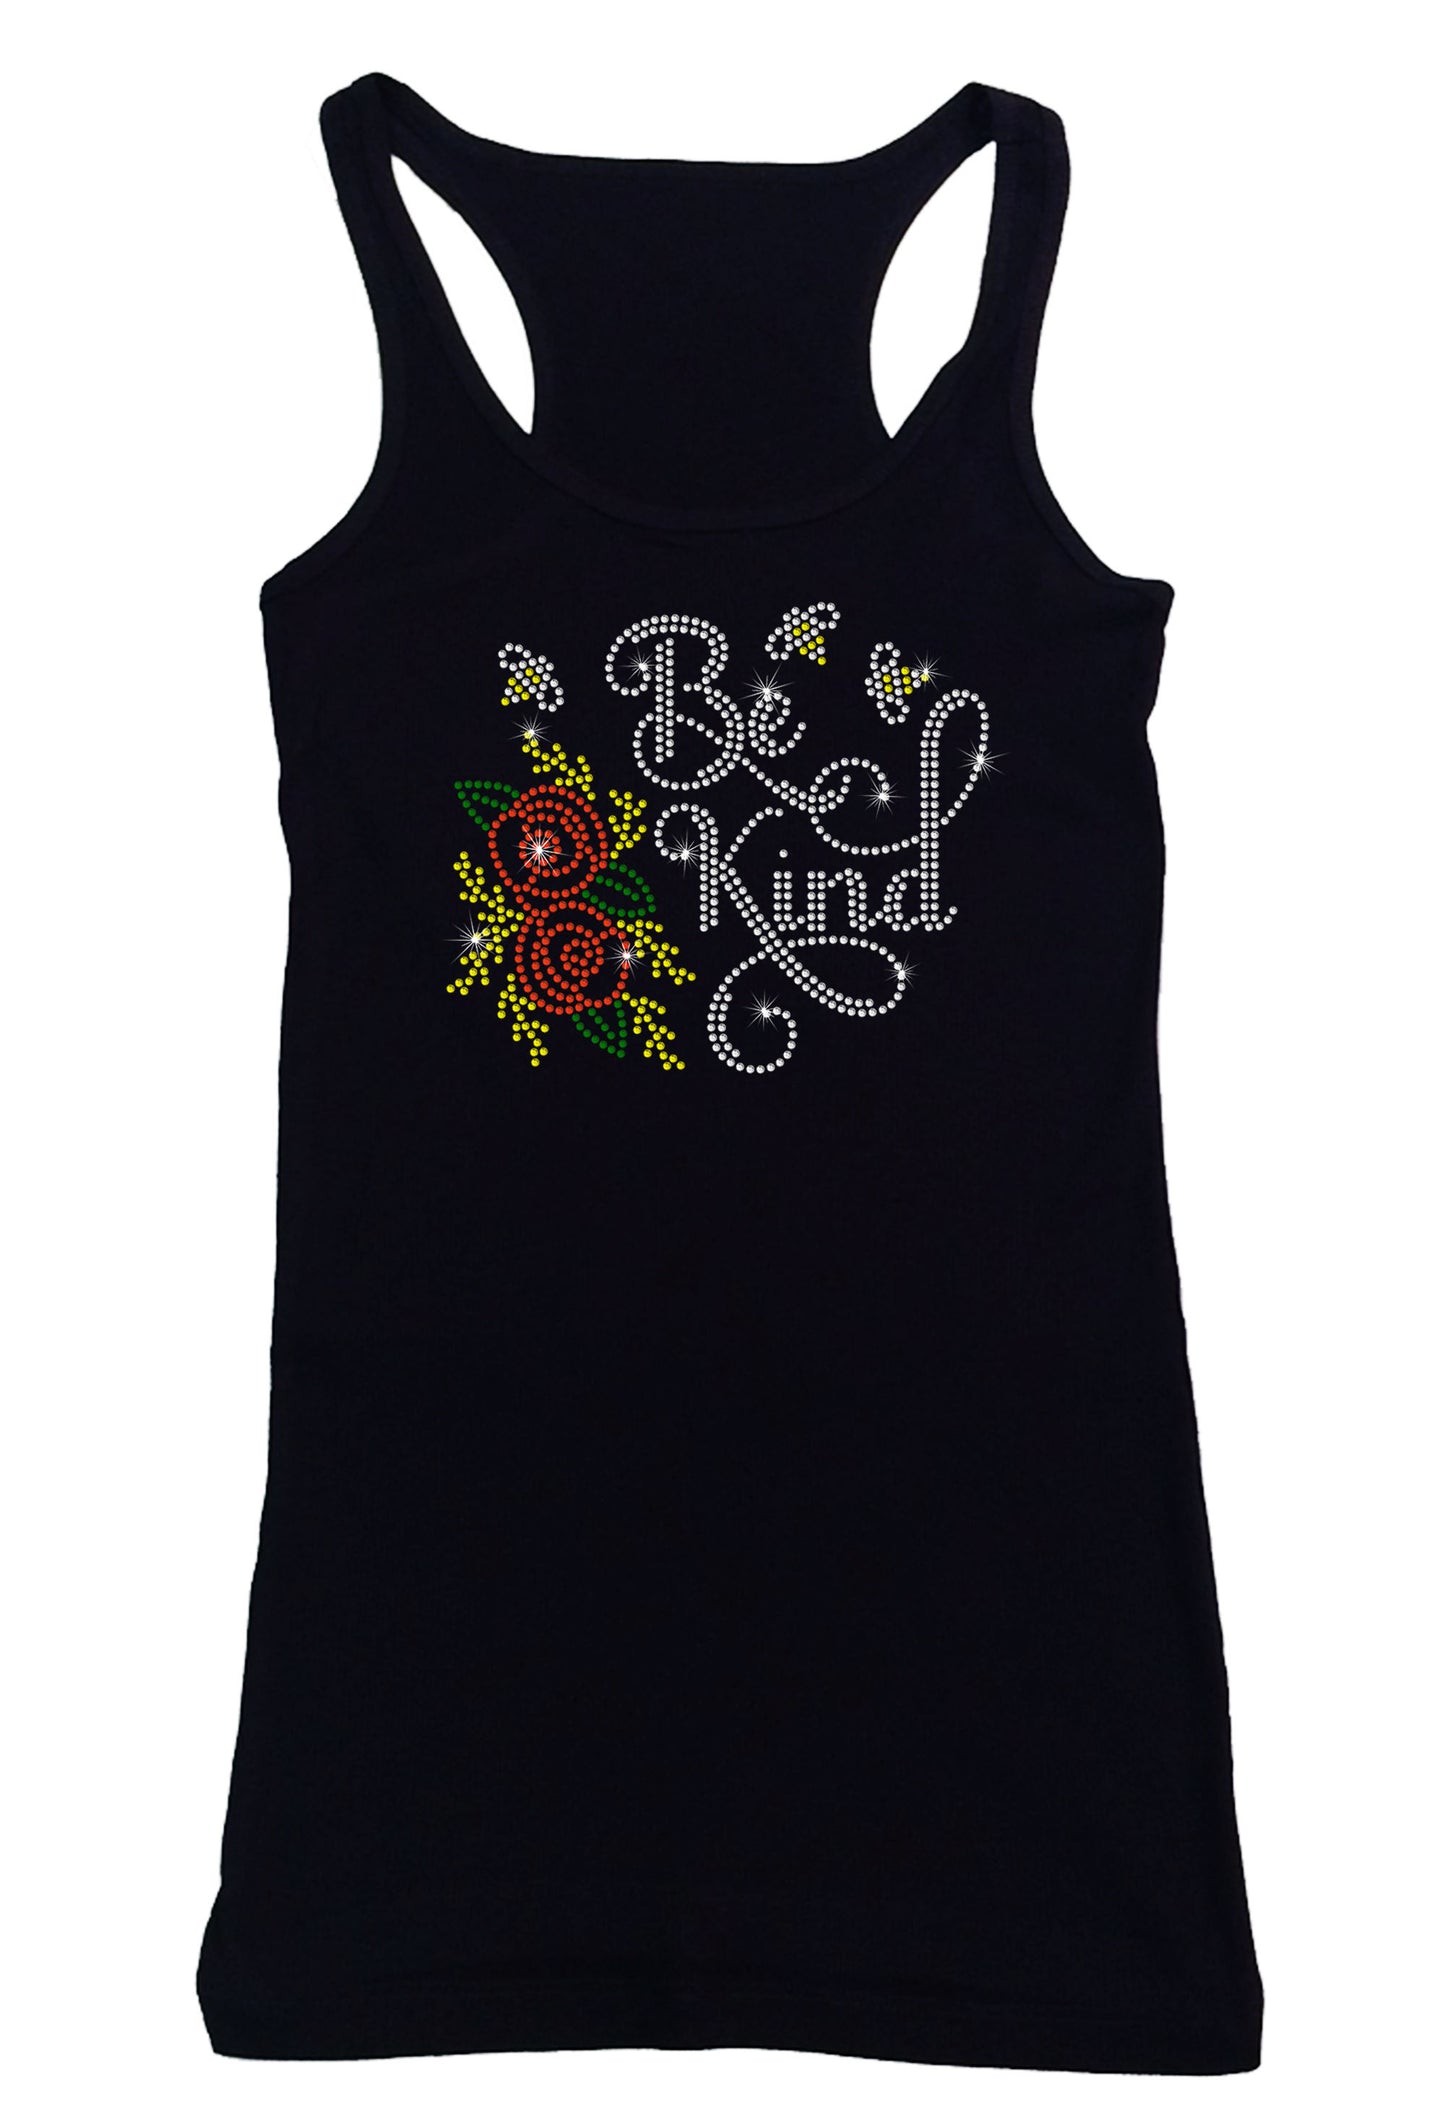 Women's Rhinestone Fitted Tight Snug Be Kind with Red Rose & Bees - Rhinestone Shirt